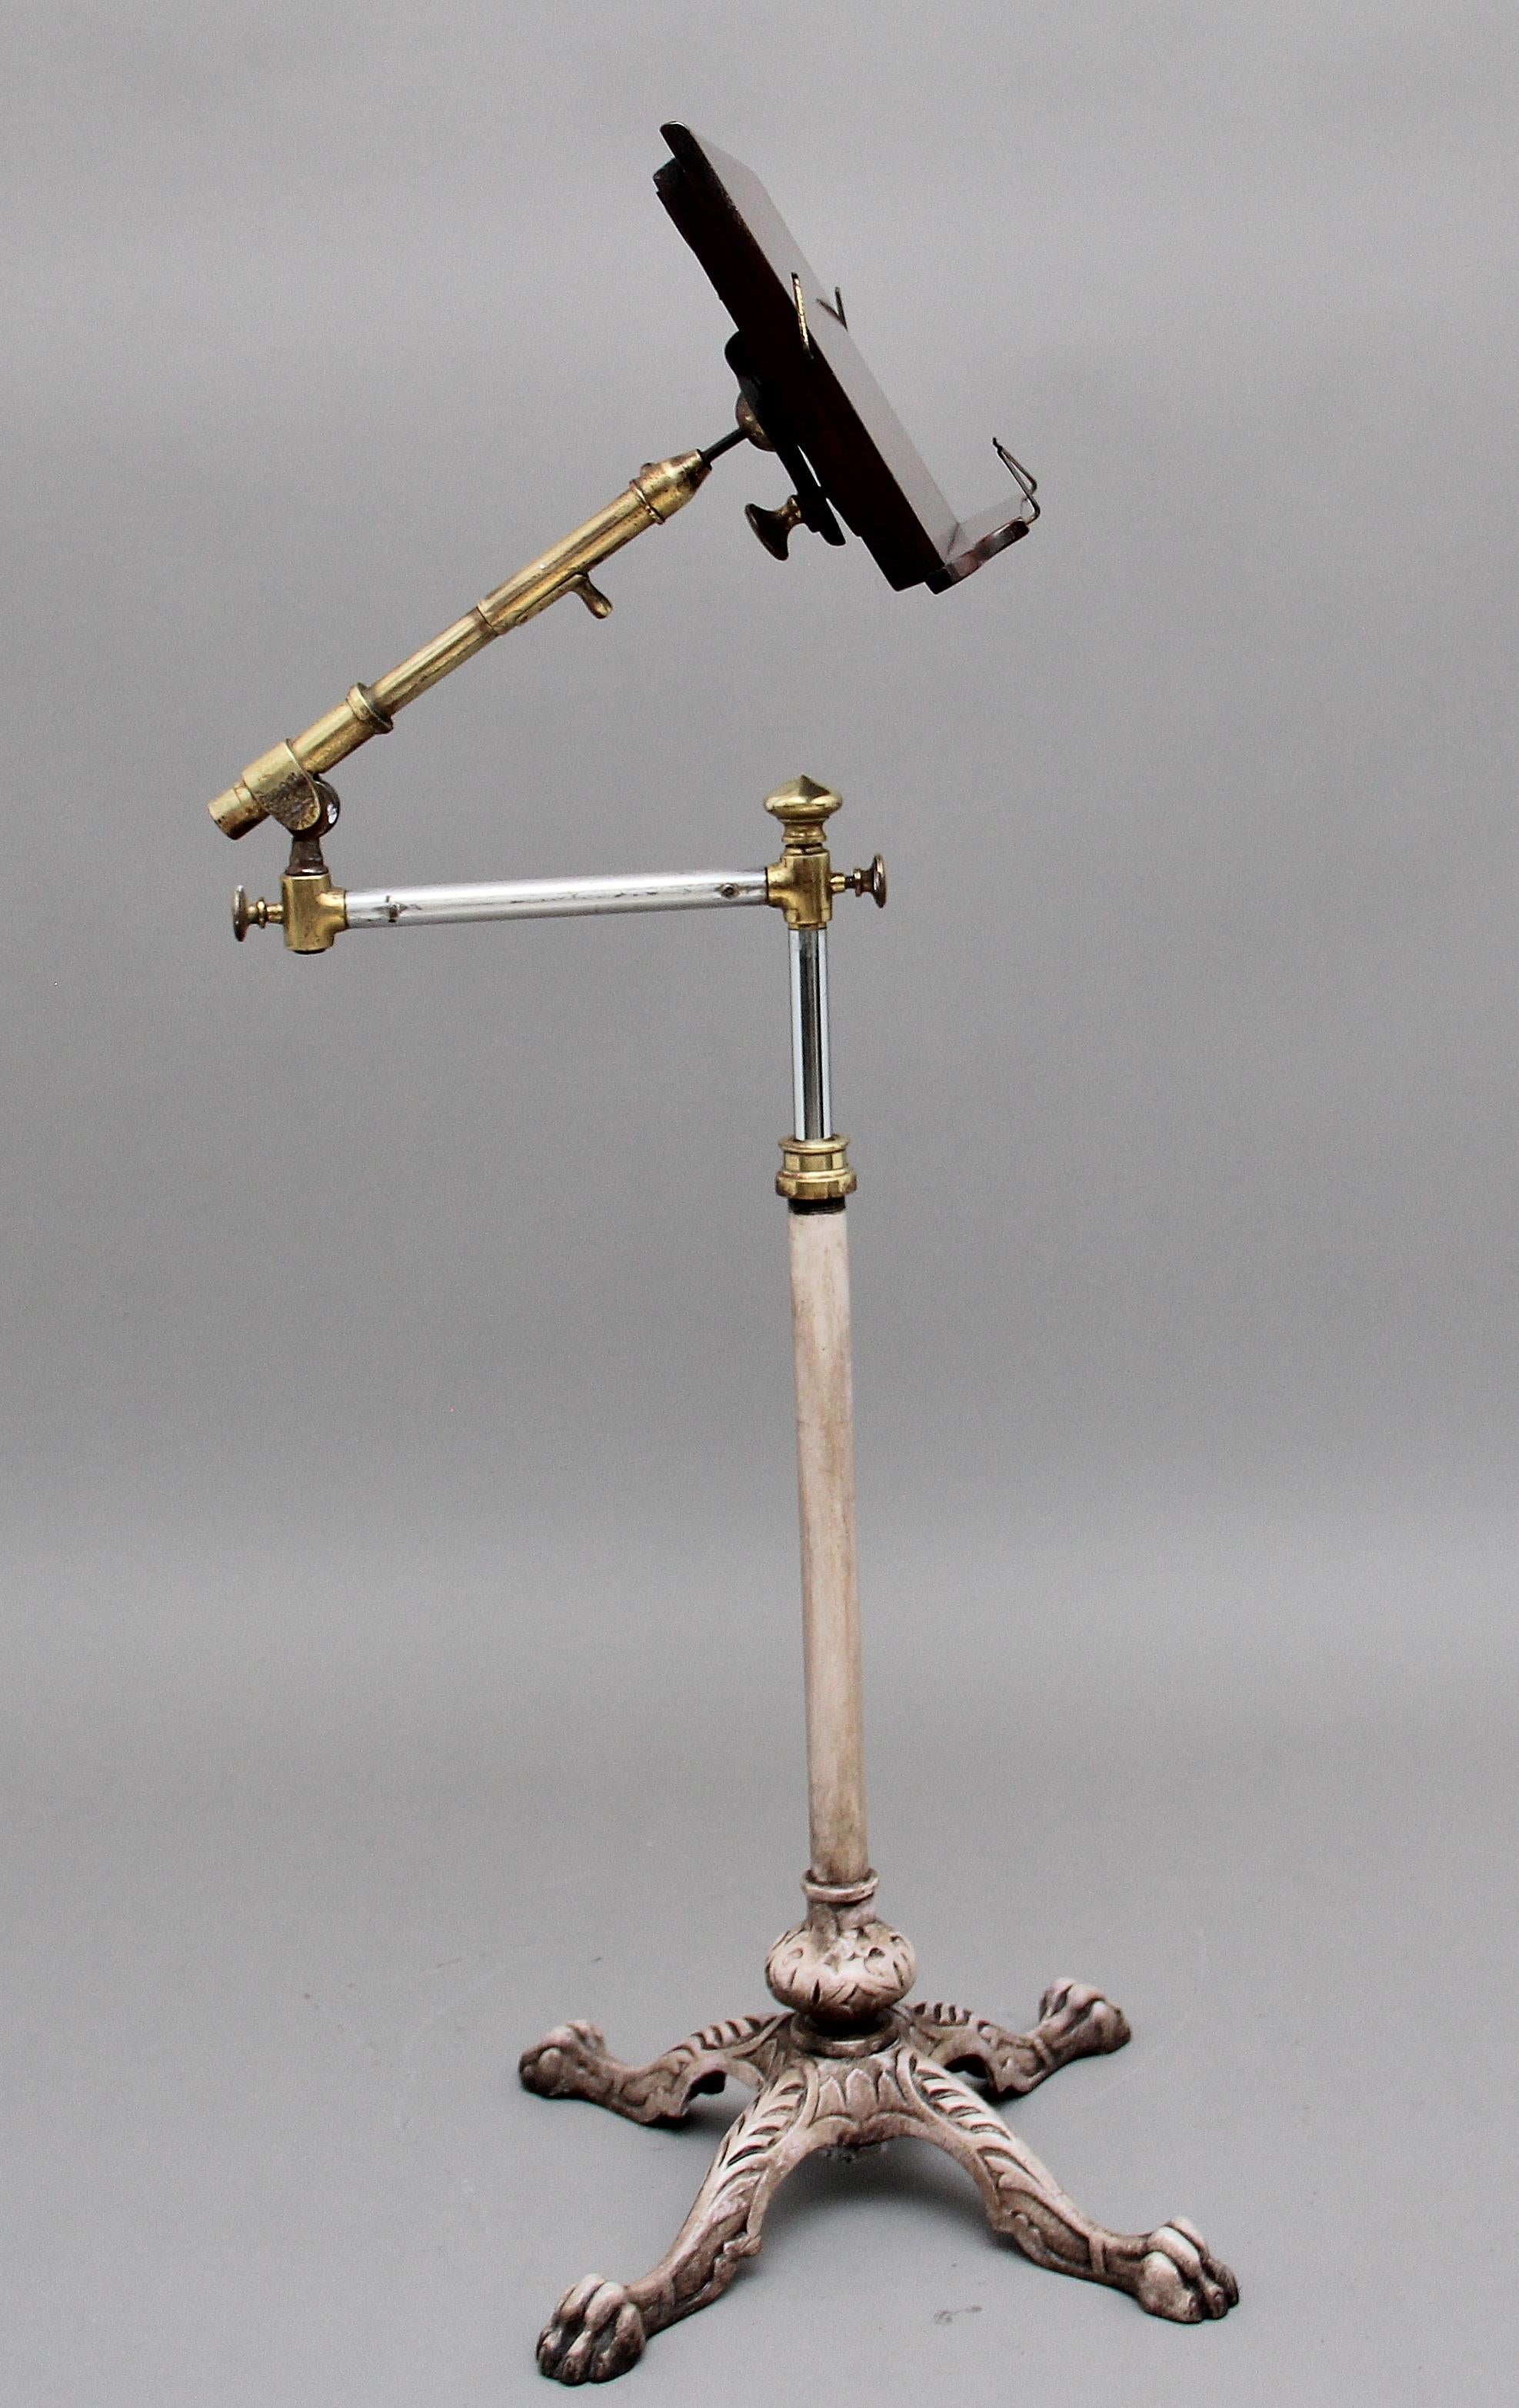 19th century metamorphic brass and mahogany reading /music stand, each section is fully adjustable and there is a tilt facility on the mahogany reading section, supported on a turned column with a very decorative engraved metal quad base with claw